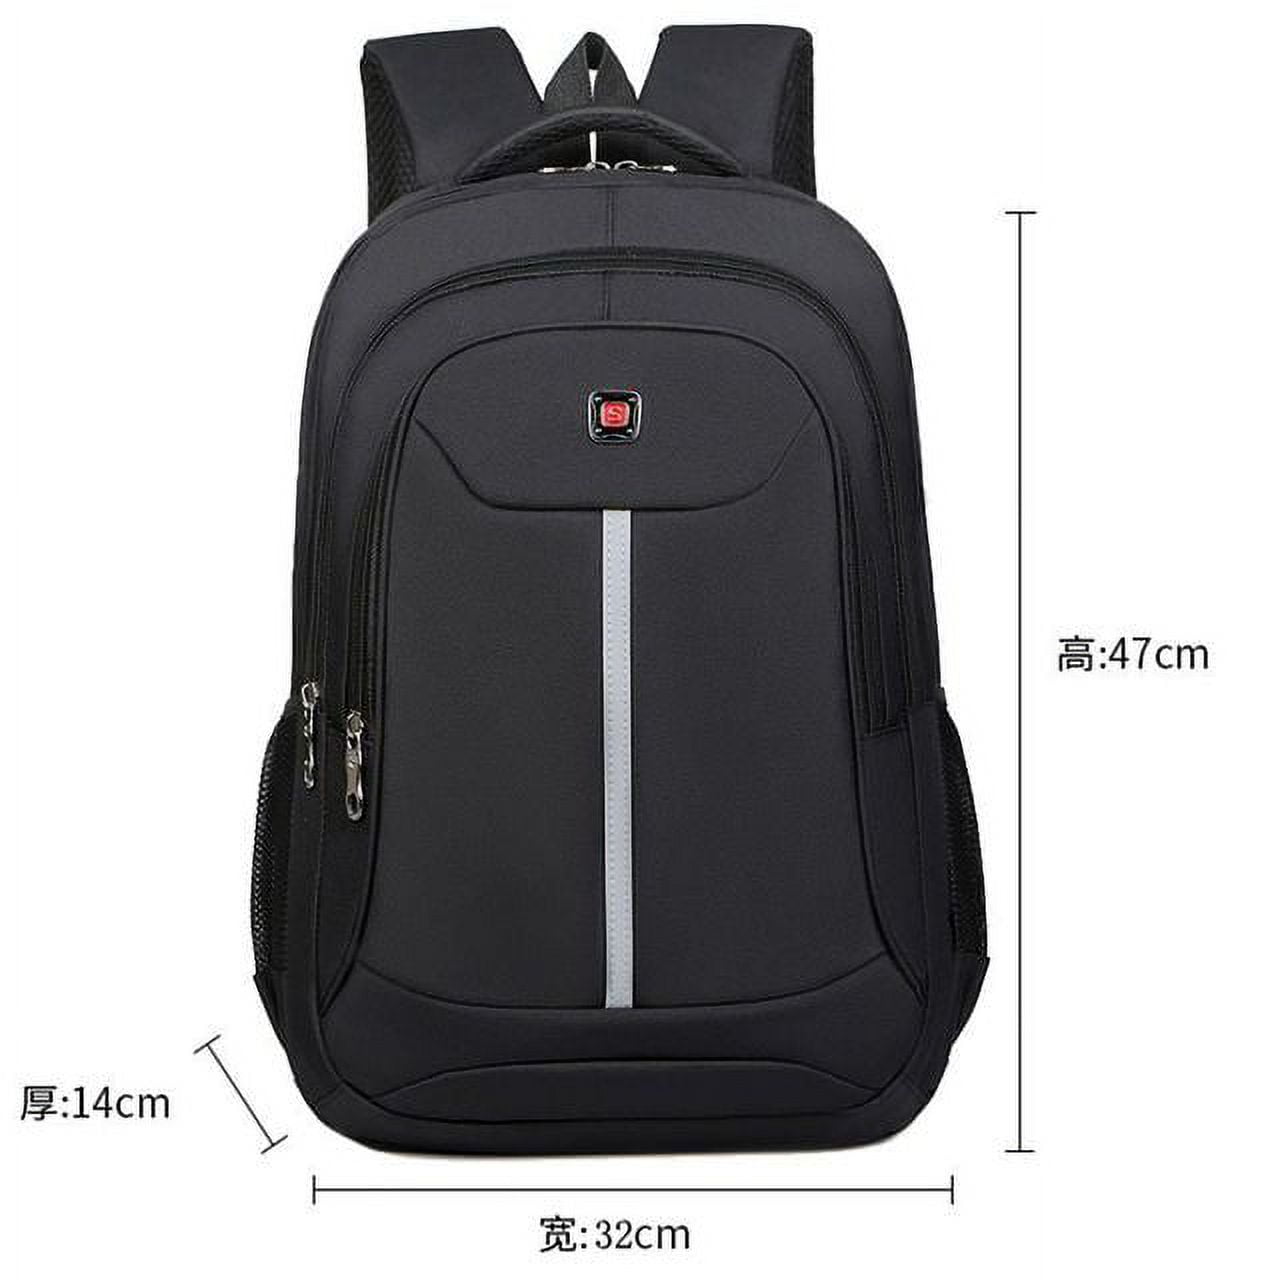 Cocopeaunt College Student Backpack Men Large Capacity High School Bag for Teenage Nylon Casual Campus Man Backpack Laptop 15.6 inch, Adult Unisex